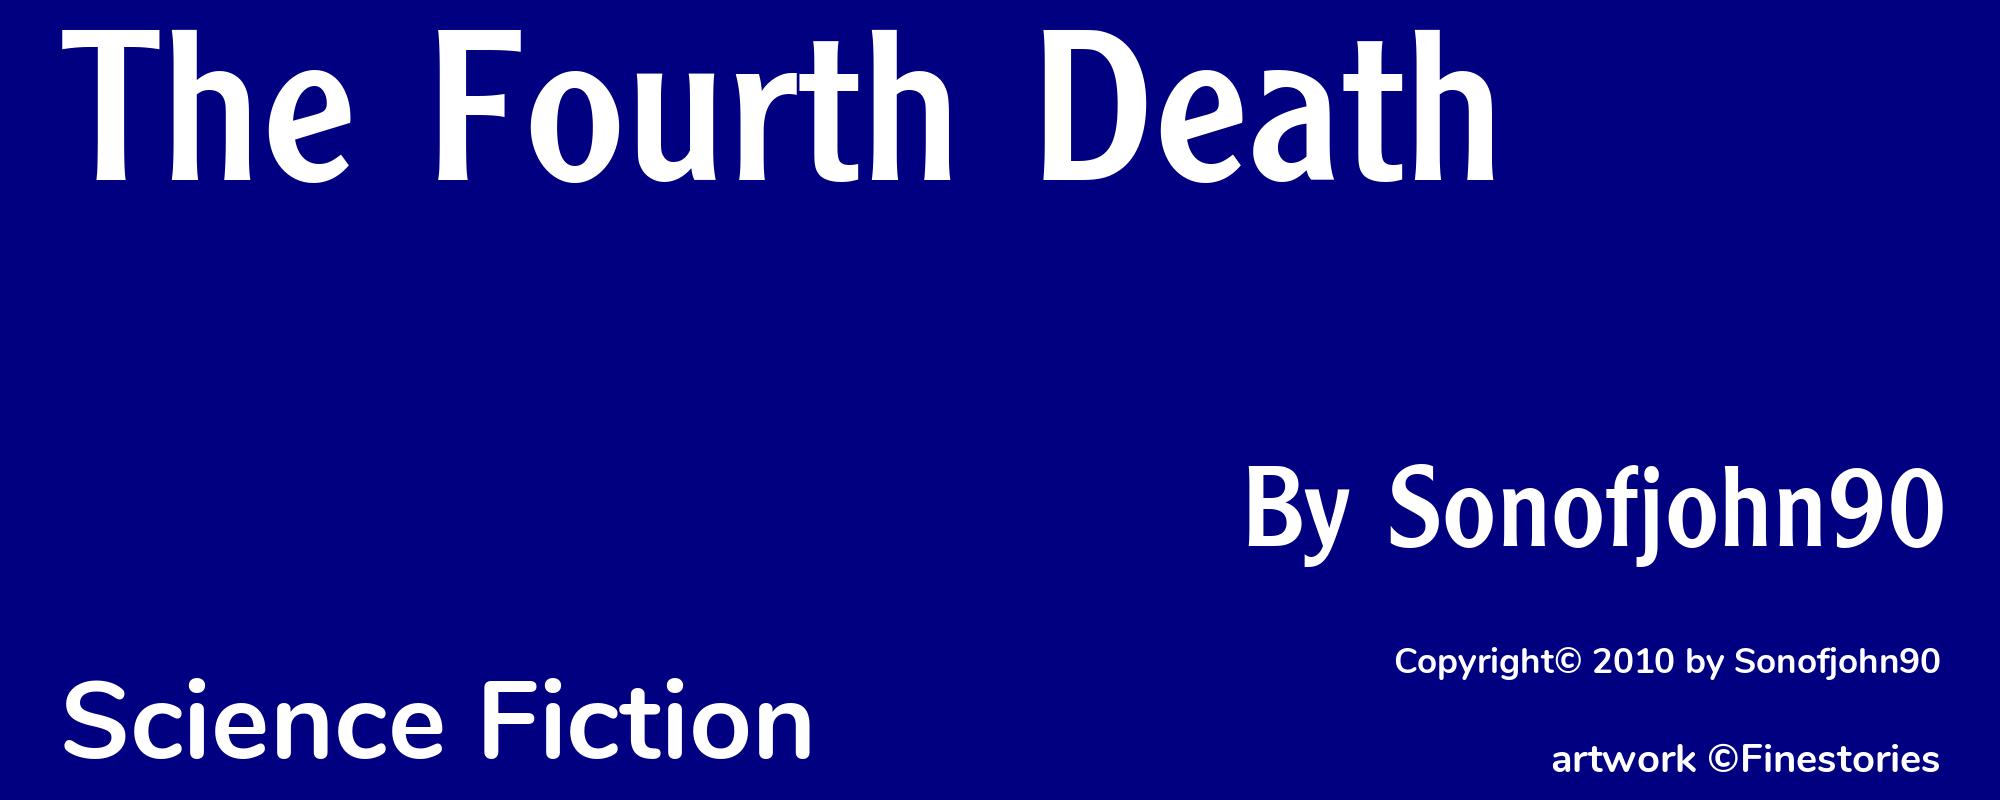 The Fourth Death - Cover